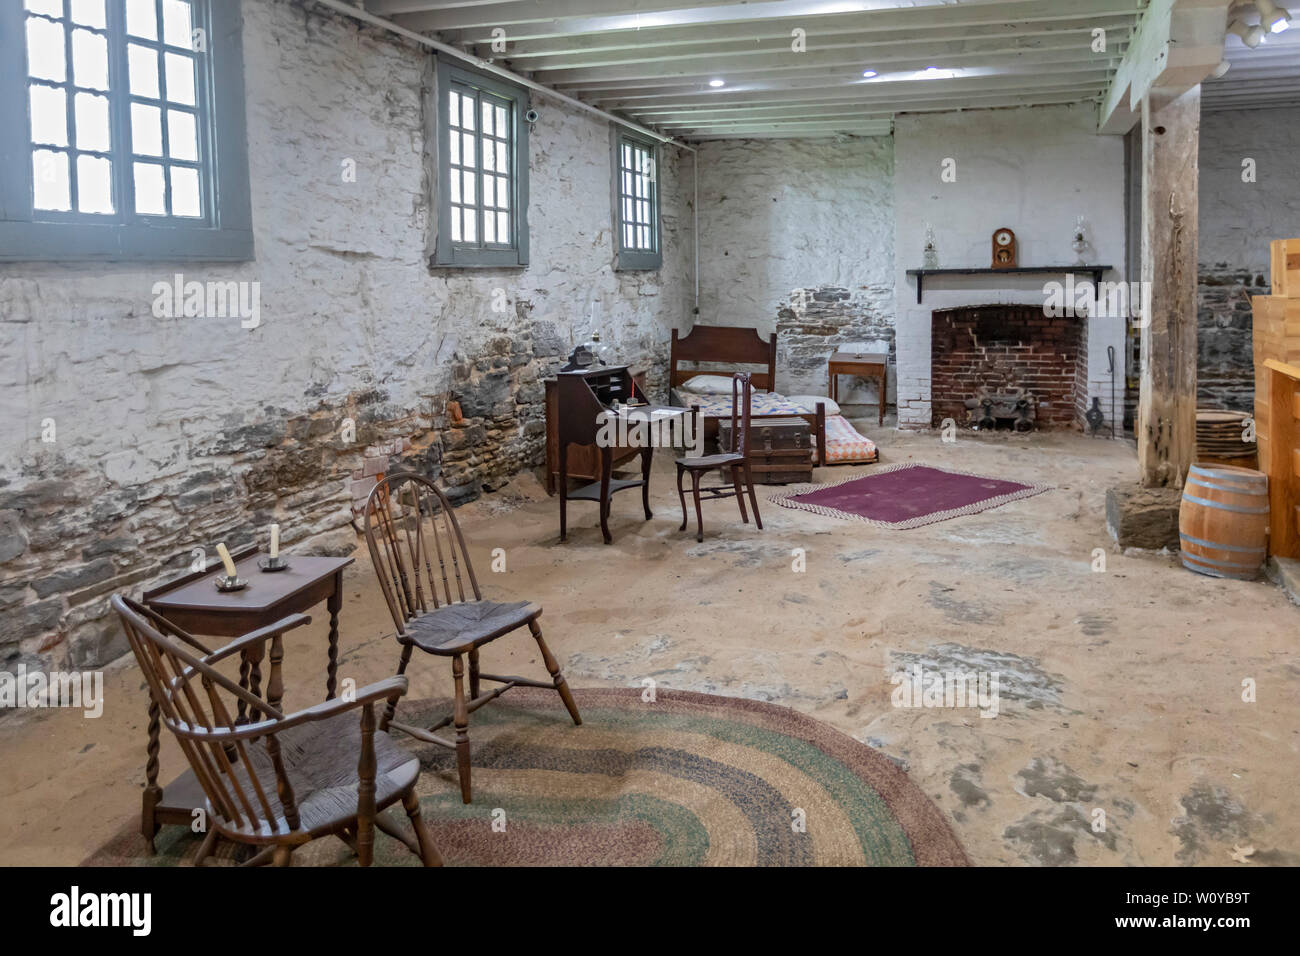 Fort Smith, Arkansas - The commissary building at Fort Smith National Historic Site. At one time the building was a residence for federal court offici Stock Photo